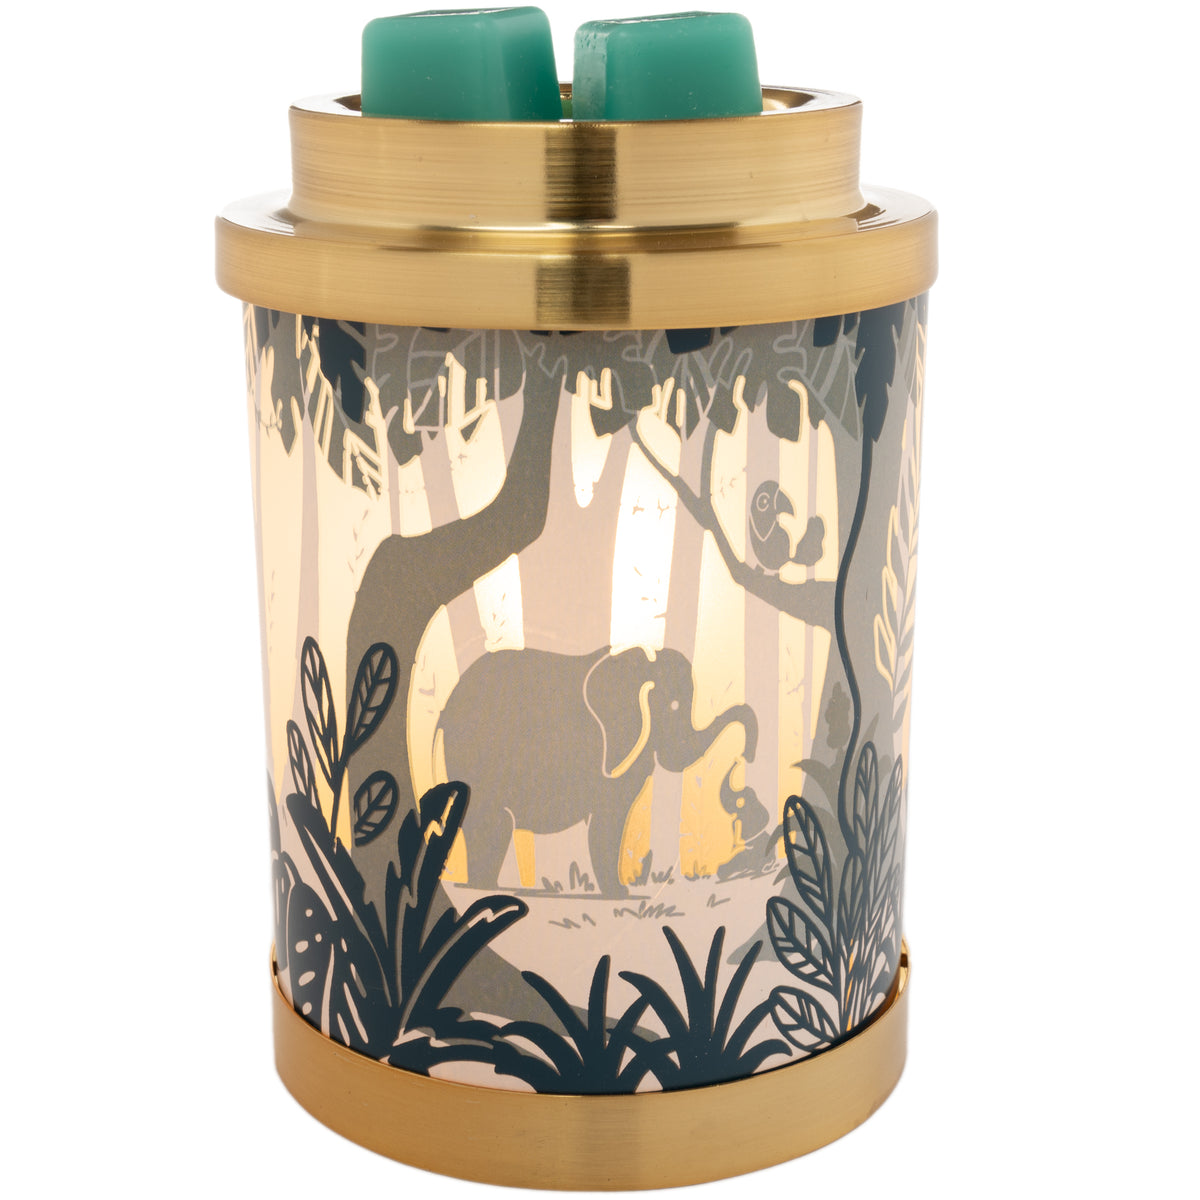 Explore Our Wax Melter Collection